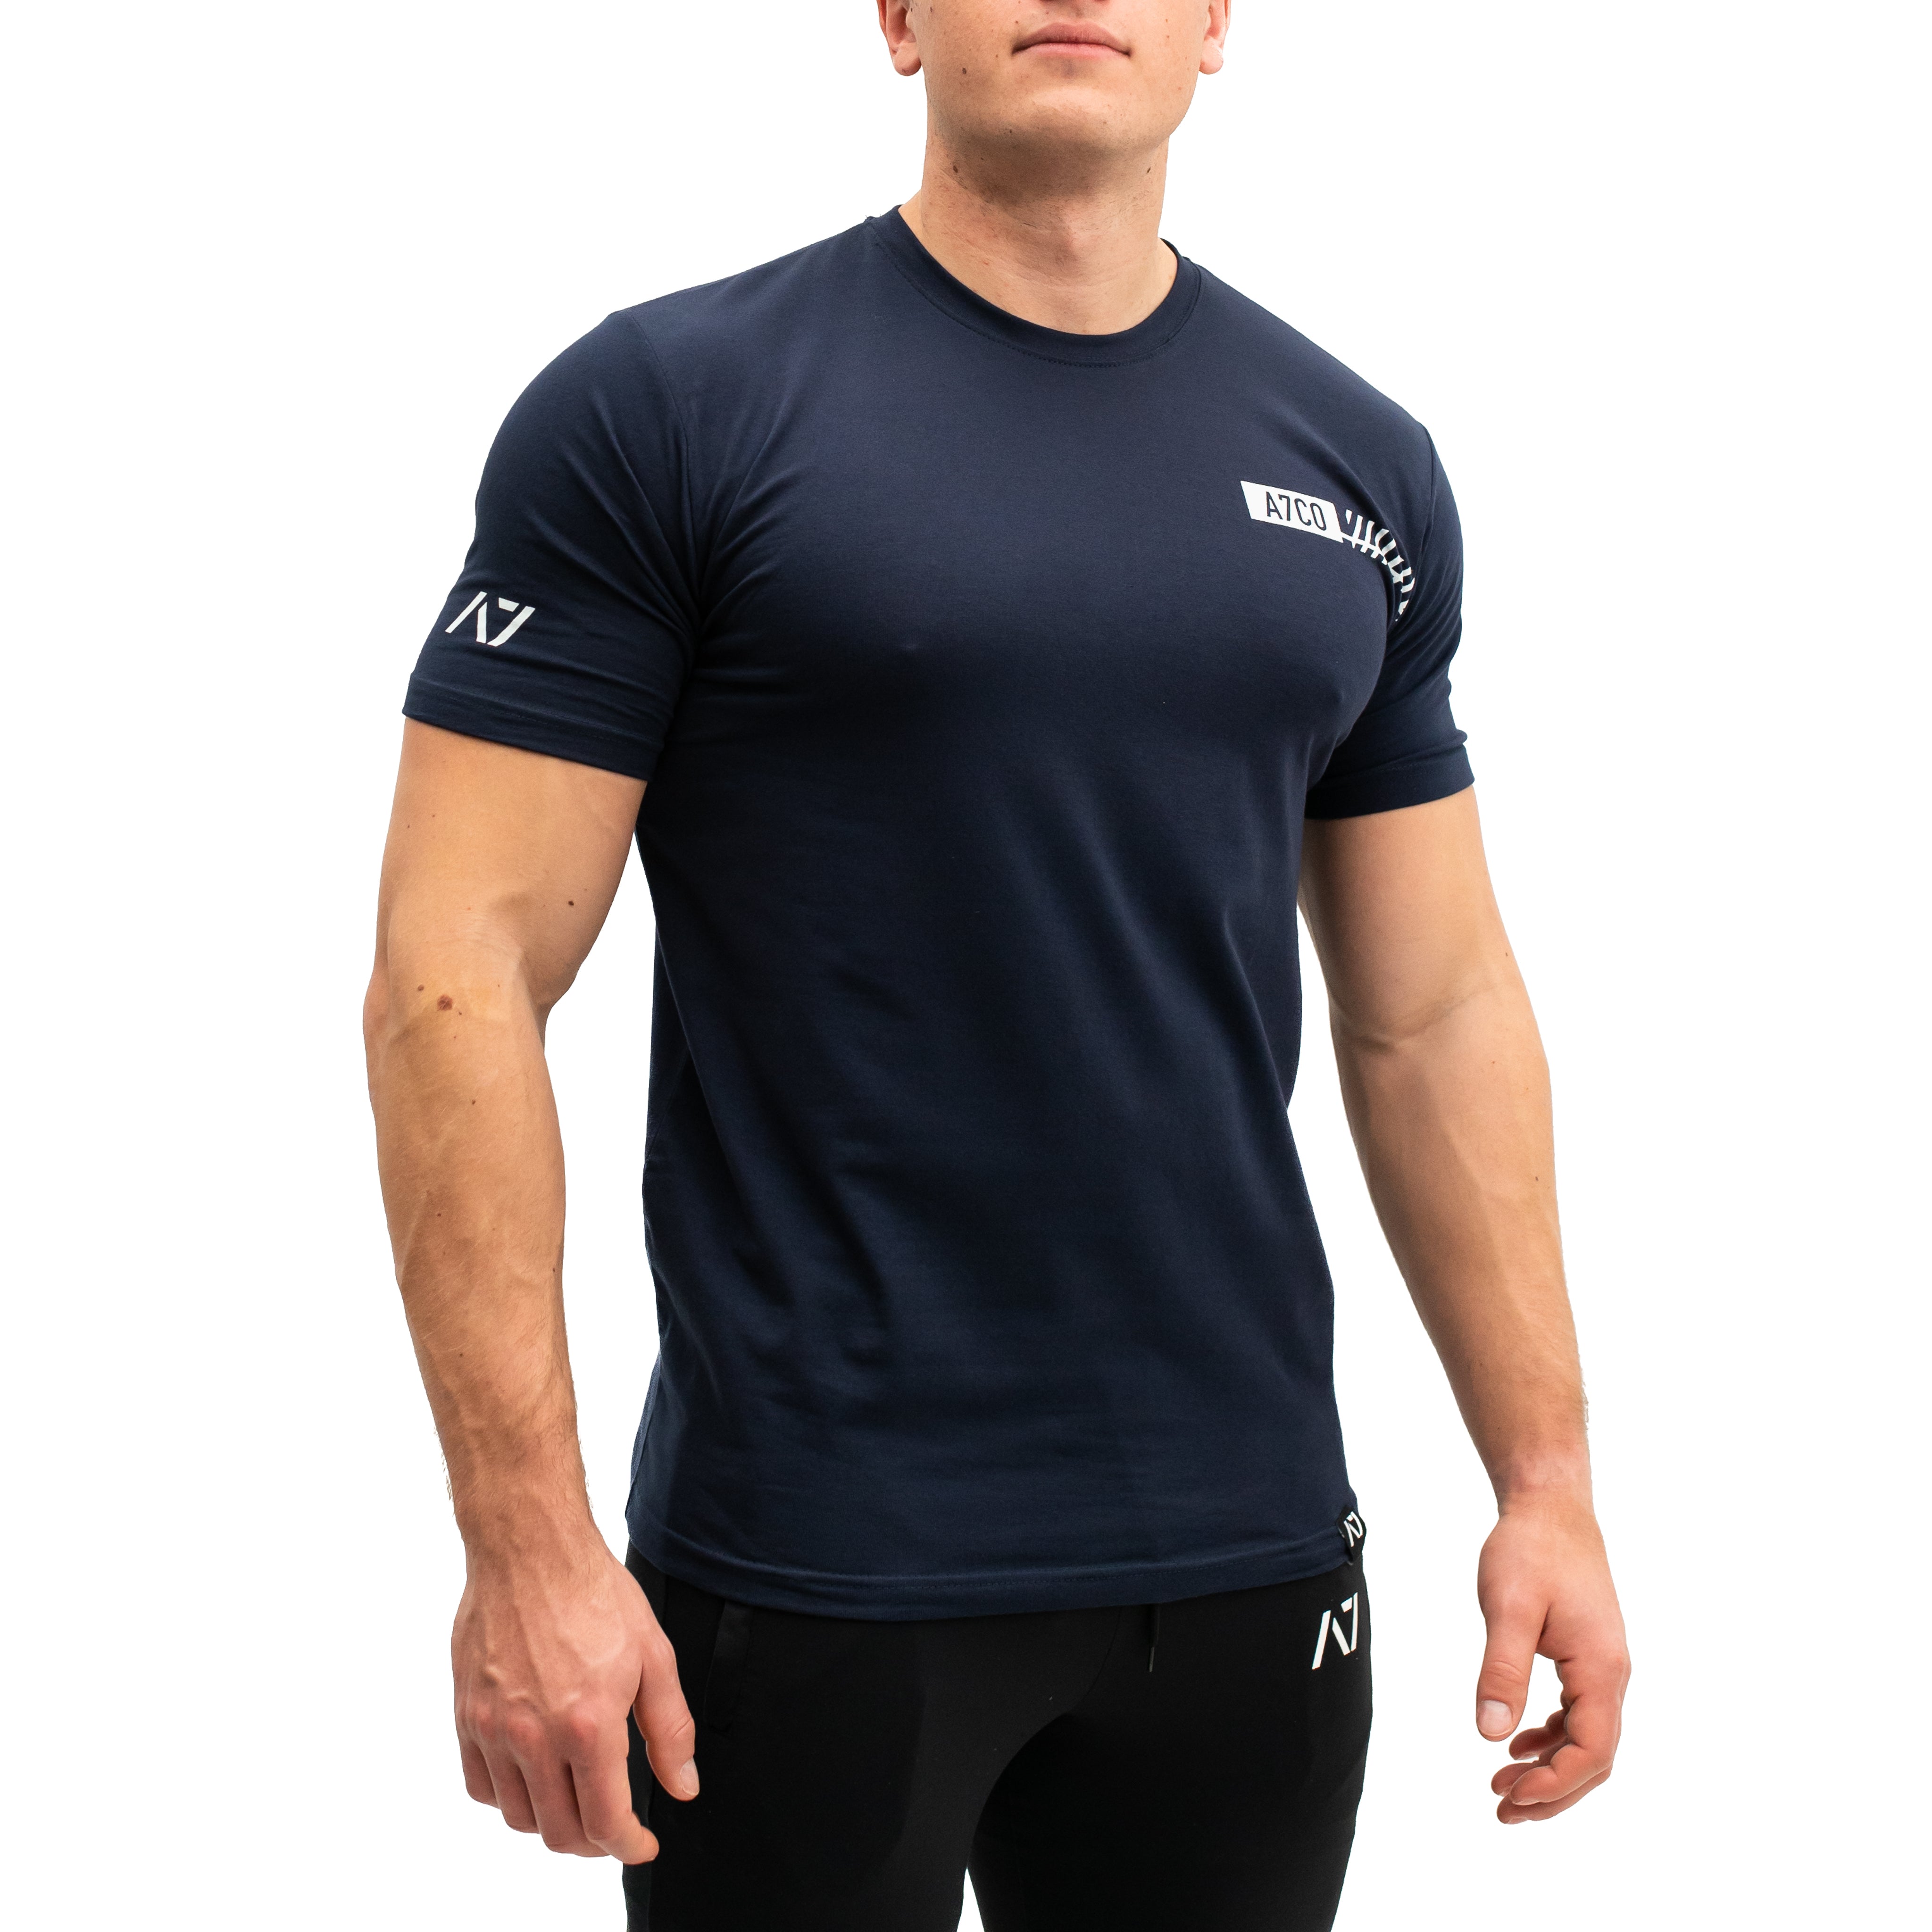 The Impact Shirt reminds us we can conquer challenges and make an impact. The future is only the continuation of our progress. Purchase Impact Shirt from A7 UK and A7 Europe. A7UK has the best Powerlifting apparel for all workouts. Available in UK and Europe including France, Italy, Germany, the Netherlands, Sweden and Poland.